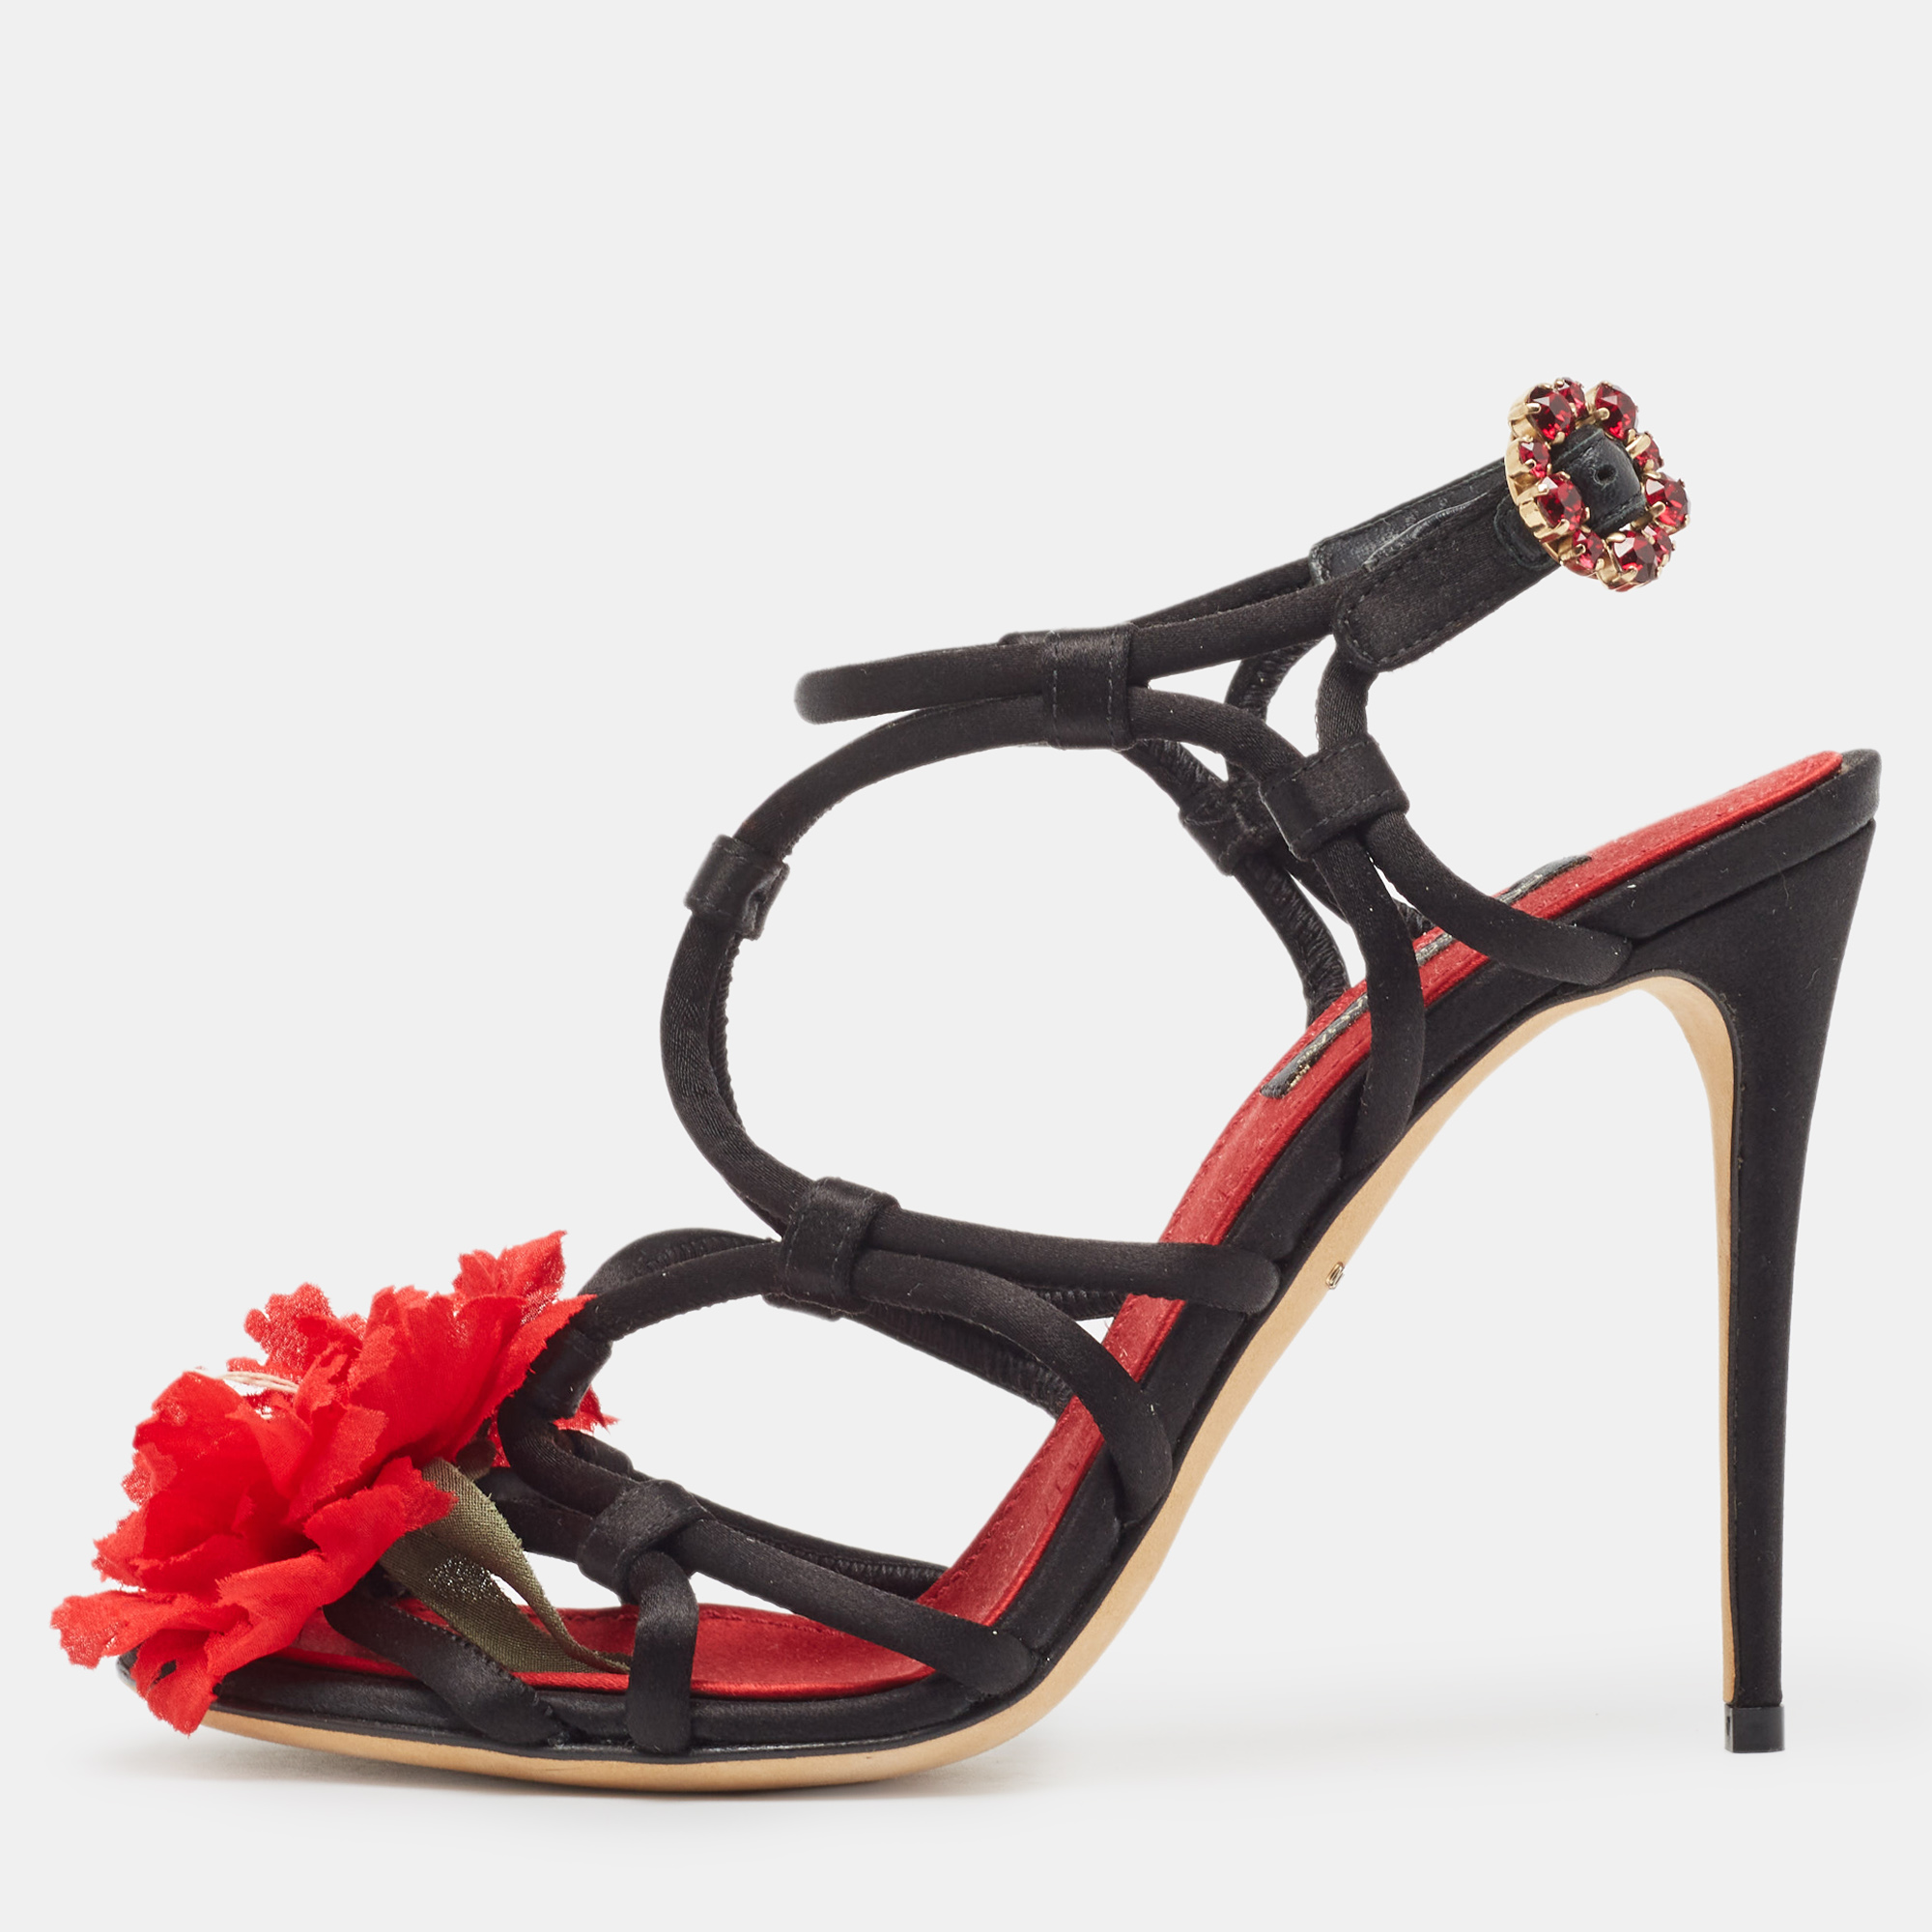 Pre-owned Dolce & Gabbana Black/red Satin Ankle Strap Sandals Size 36